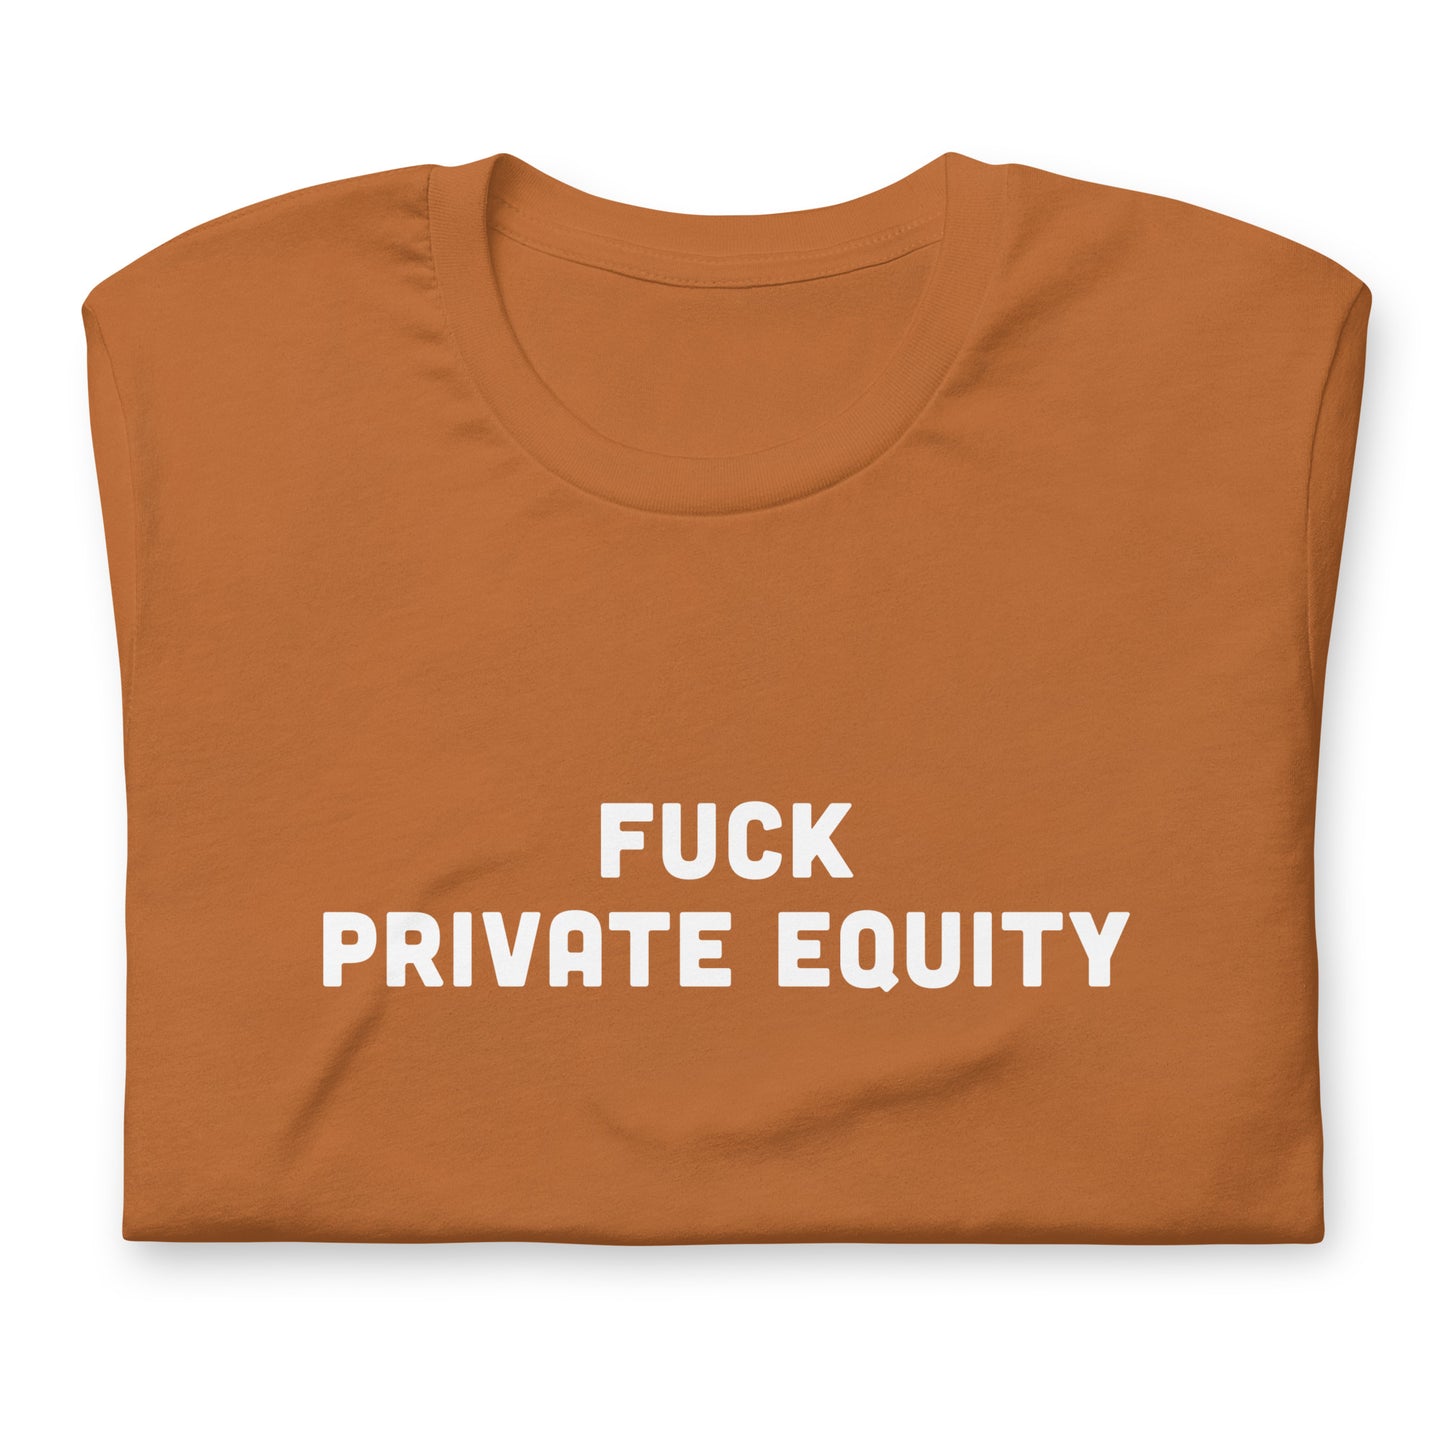 Fuck Private Equity T-Shirt Size XL Color Navy